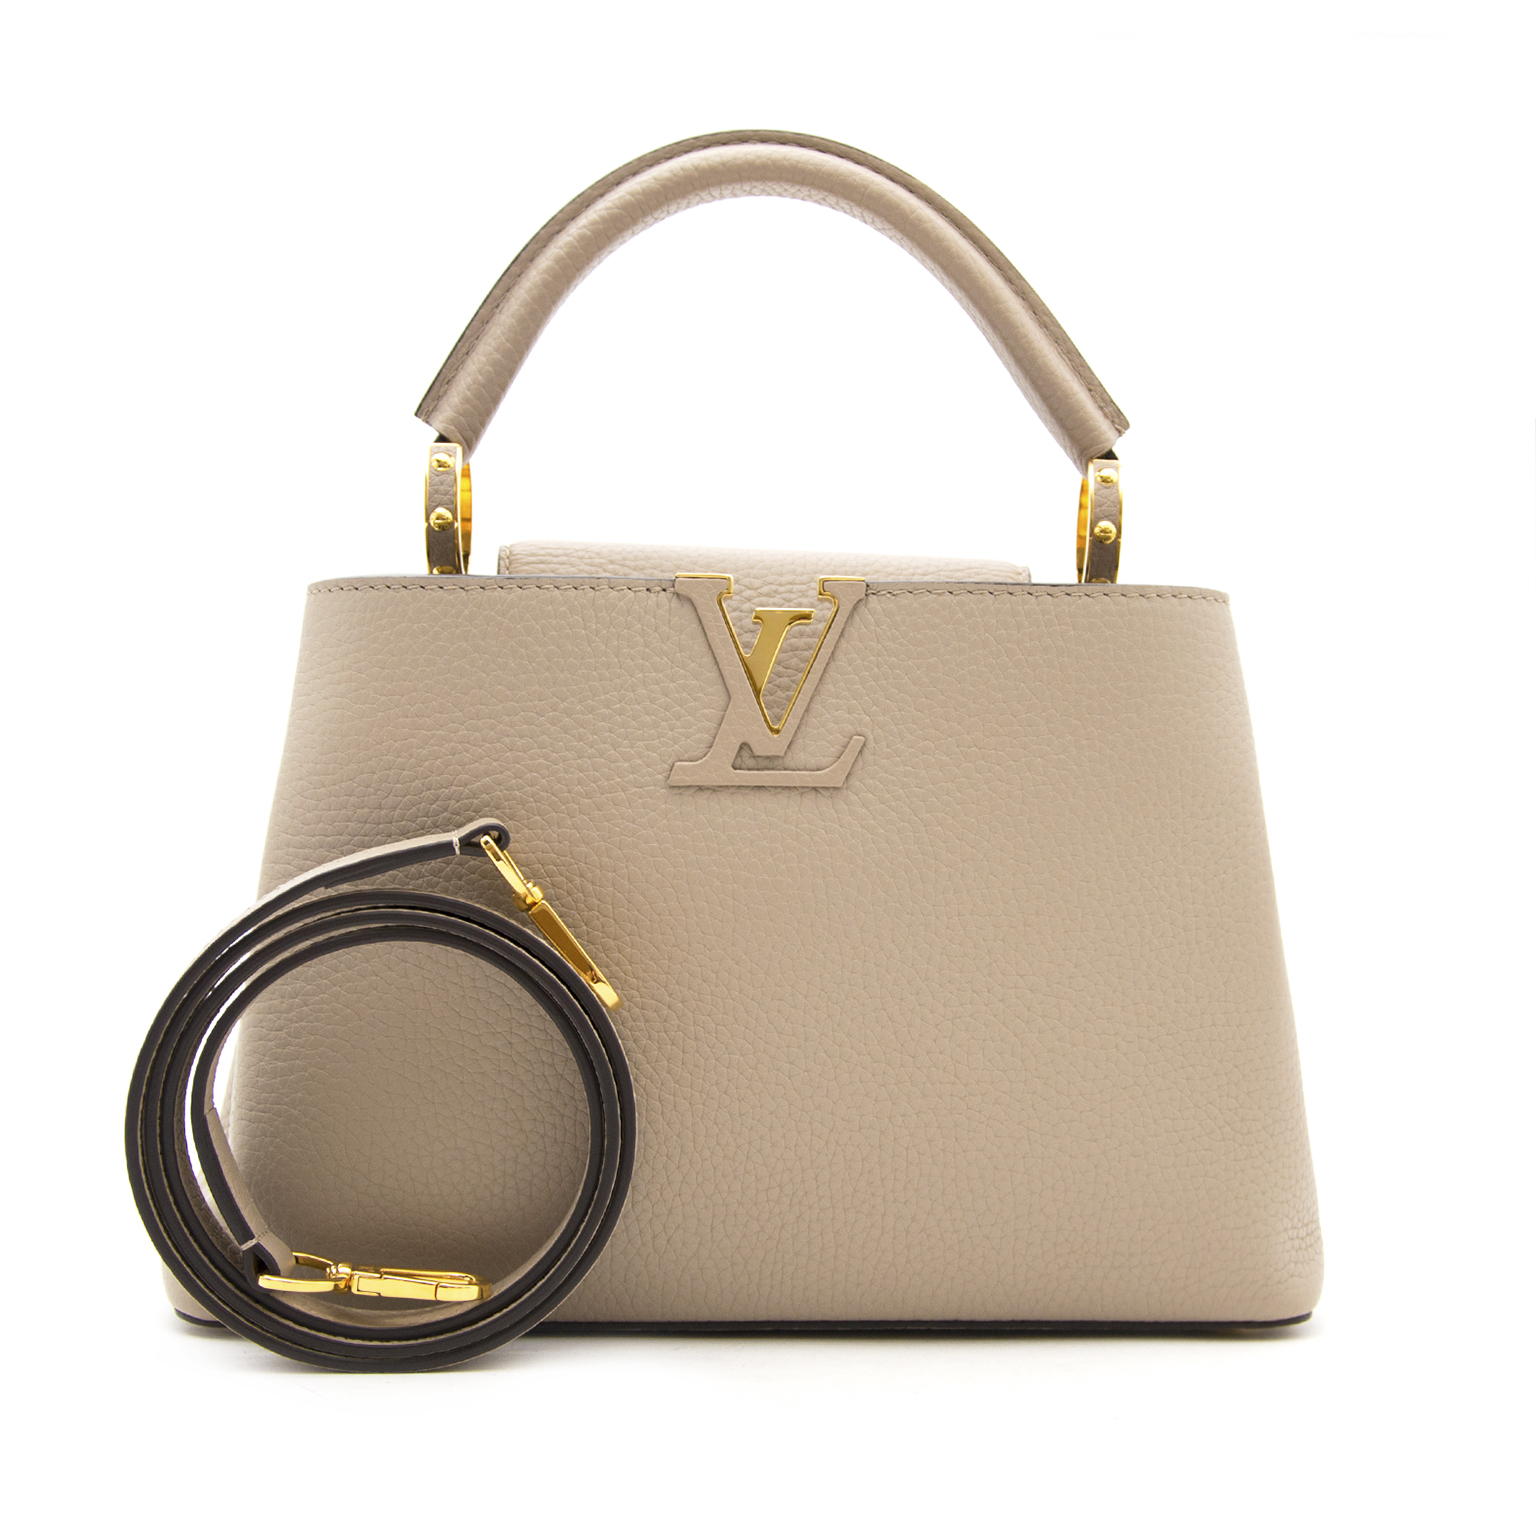 Louis Vuitton Galet Gray Taurillon Leather Capucines BB Gold Hardware, 2019  Available For Immediate Sale At Sotheby's